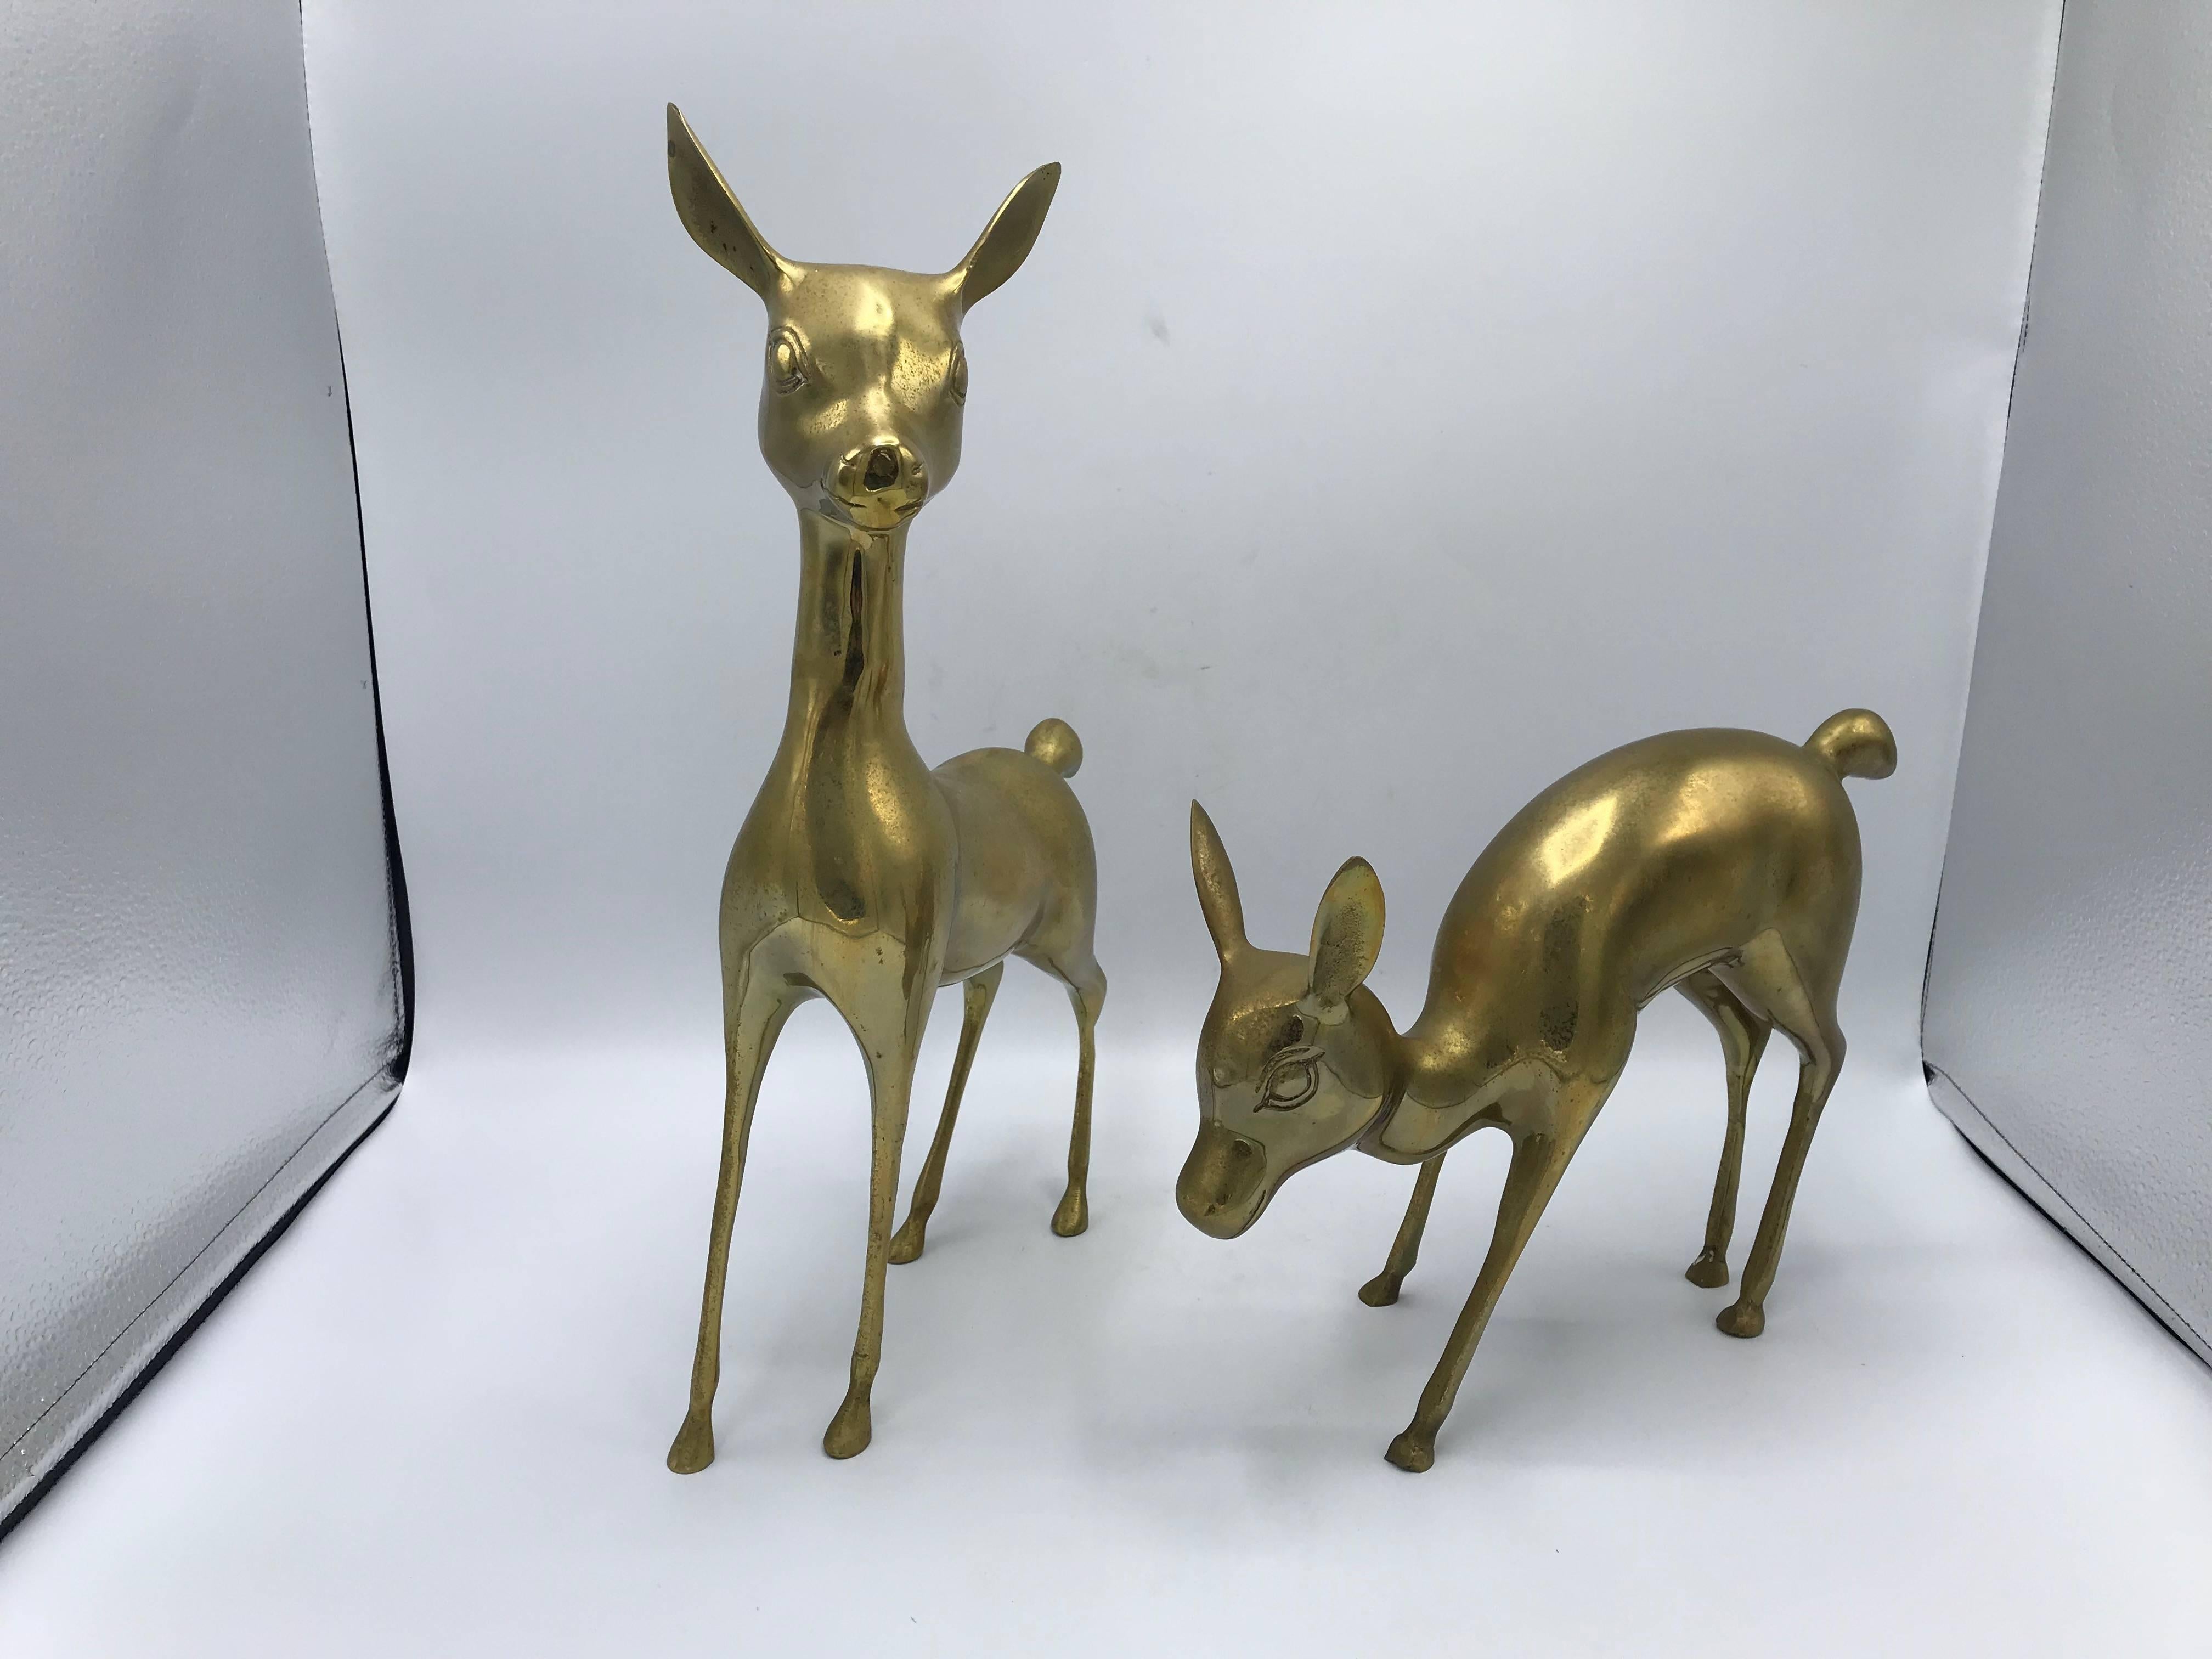 Offered is a stunning, pair of 1960s modern brass deer sculptures. These are perfect as holiday decor!